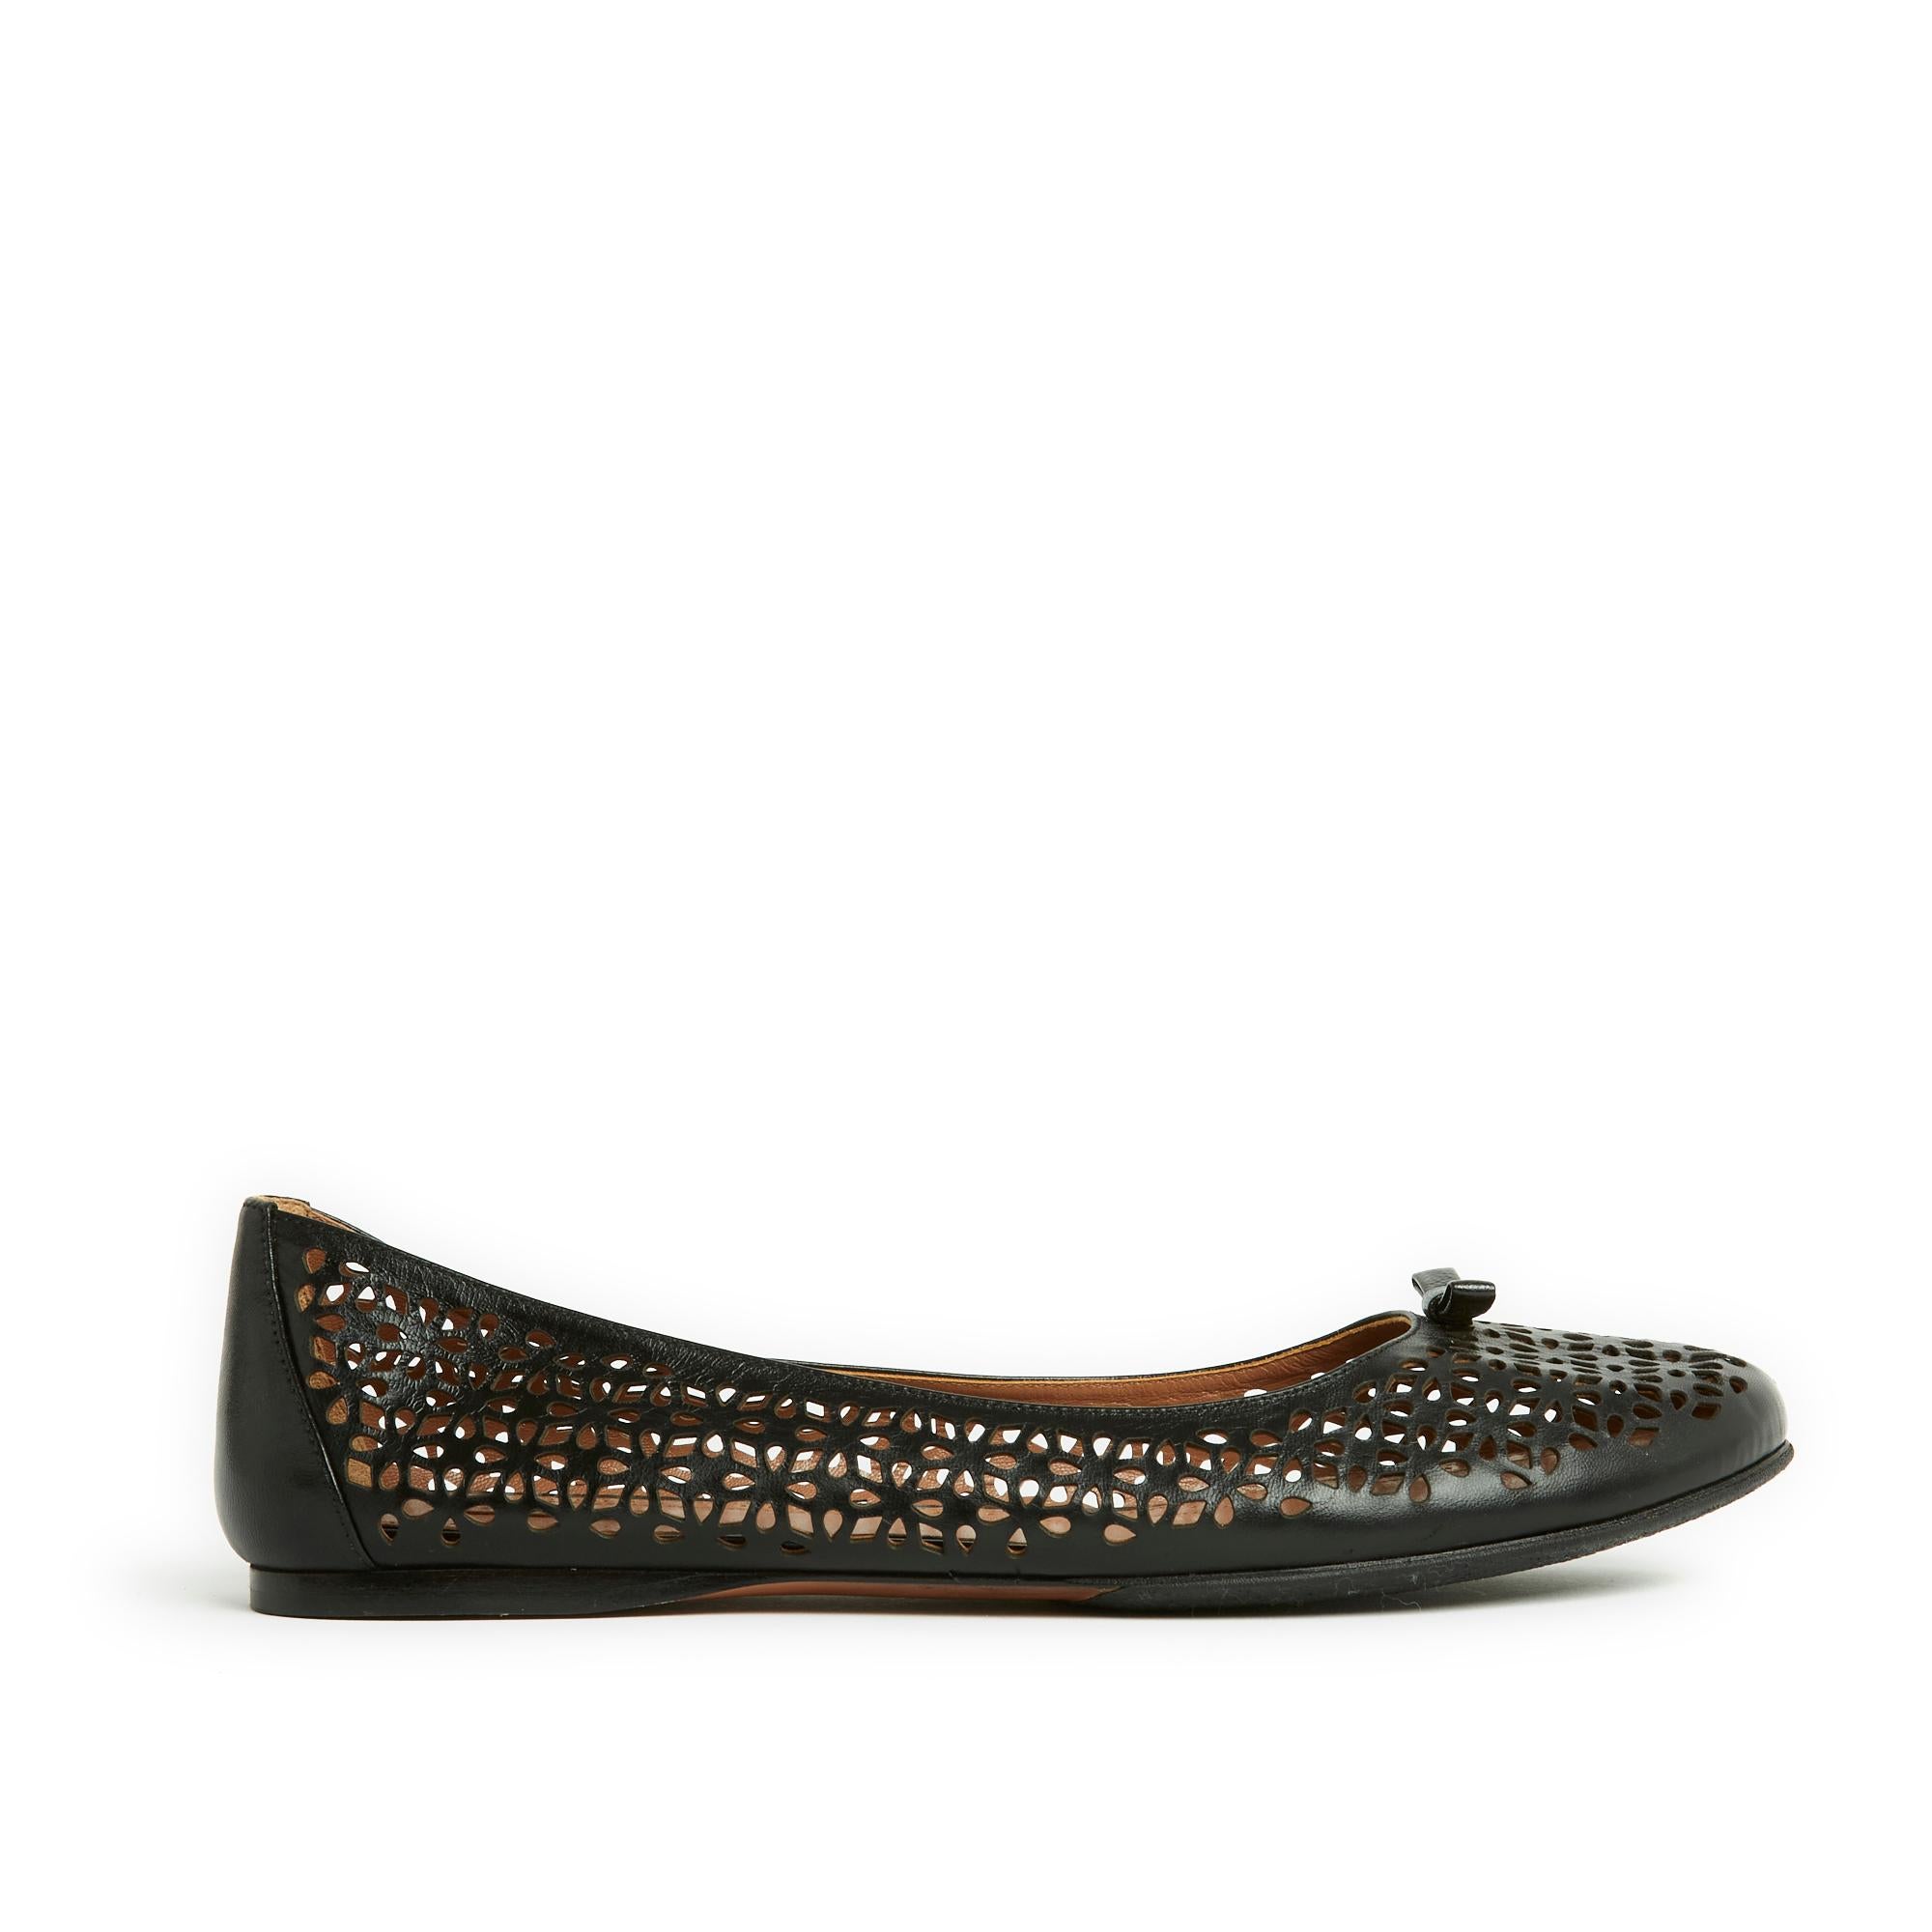 Alaïa ballerinas in smooth black openwork leather in a Vienna style pattern. Size EU41, insole 26.4 cm. The ballet flats have been worn and resoled but they seem perfectly new, lovely on the feet.